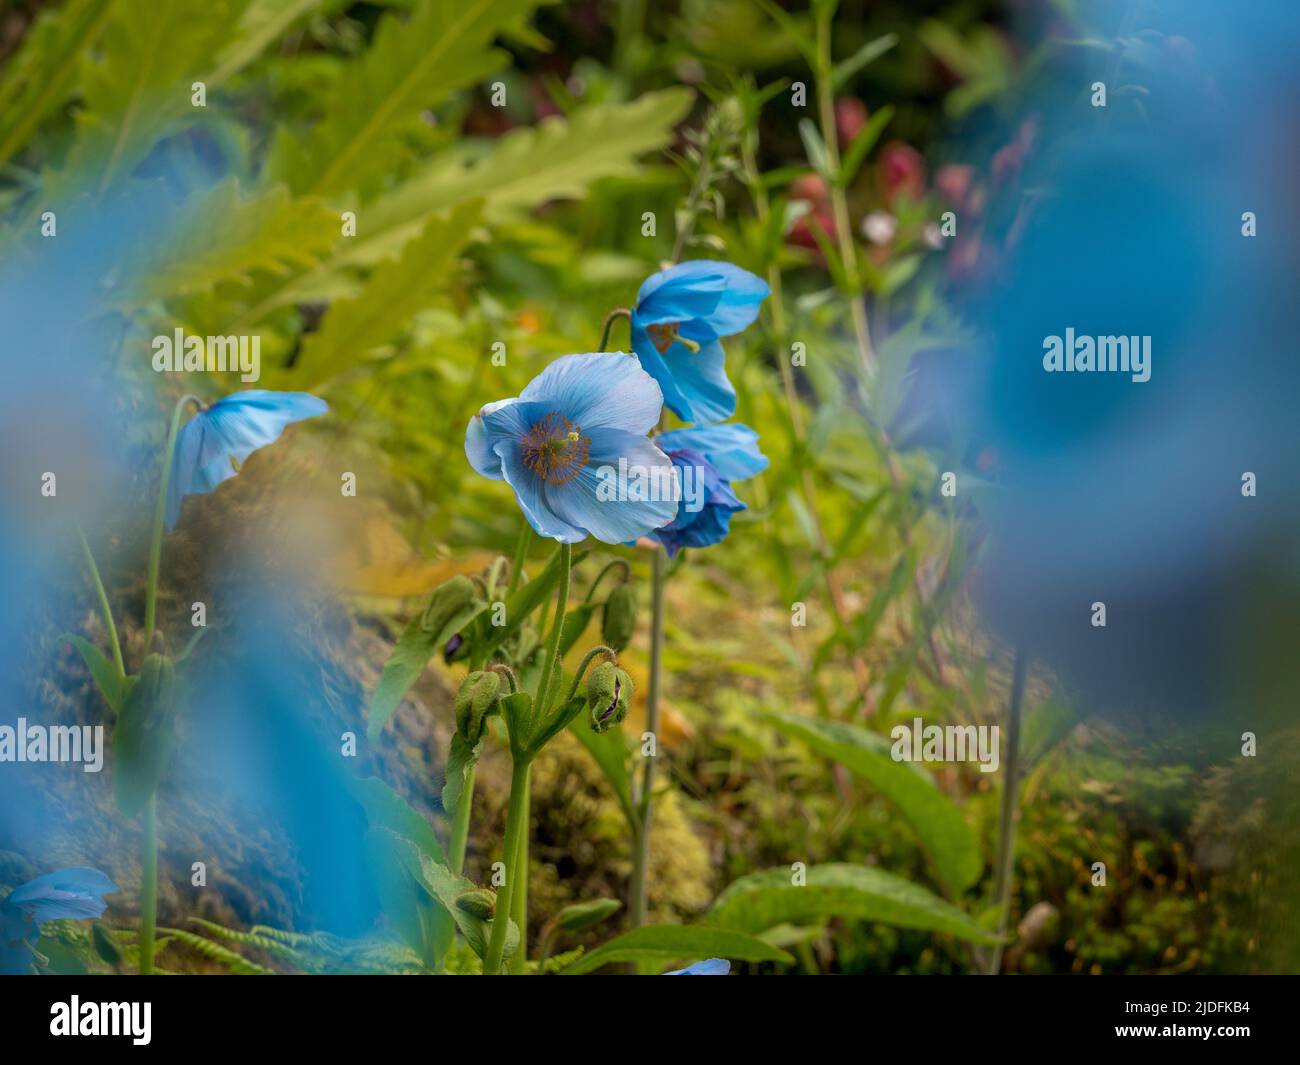 Meconopsis betonicifolia commonly know as Himalayan blue poppies growing in a UK garden. Stock Photo